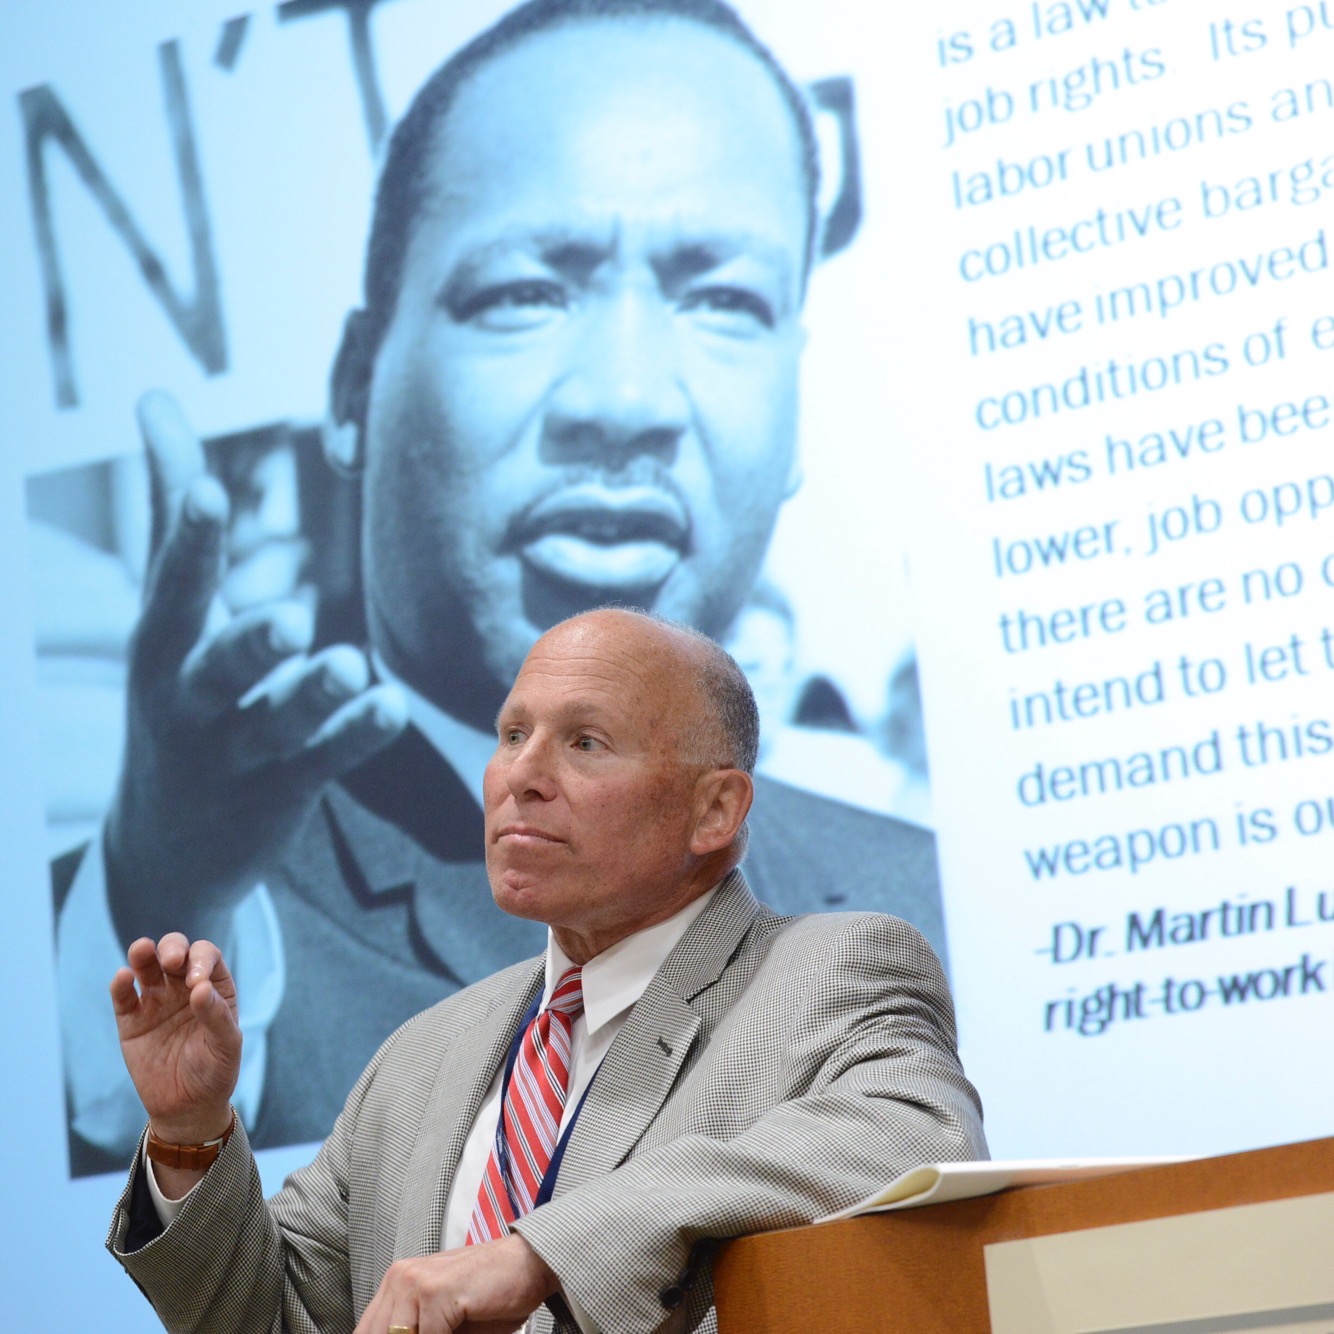 Photo of man in suit, elbow on lectern, mid-speech. Projected behind him is an image of Rev. Dr. Martin Luther King, Jr.